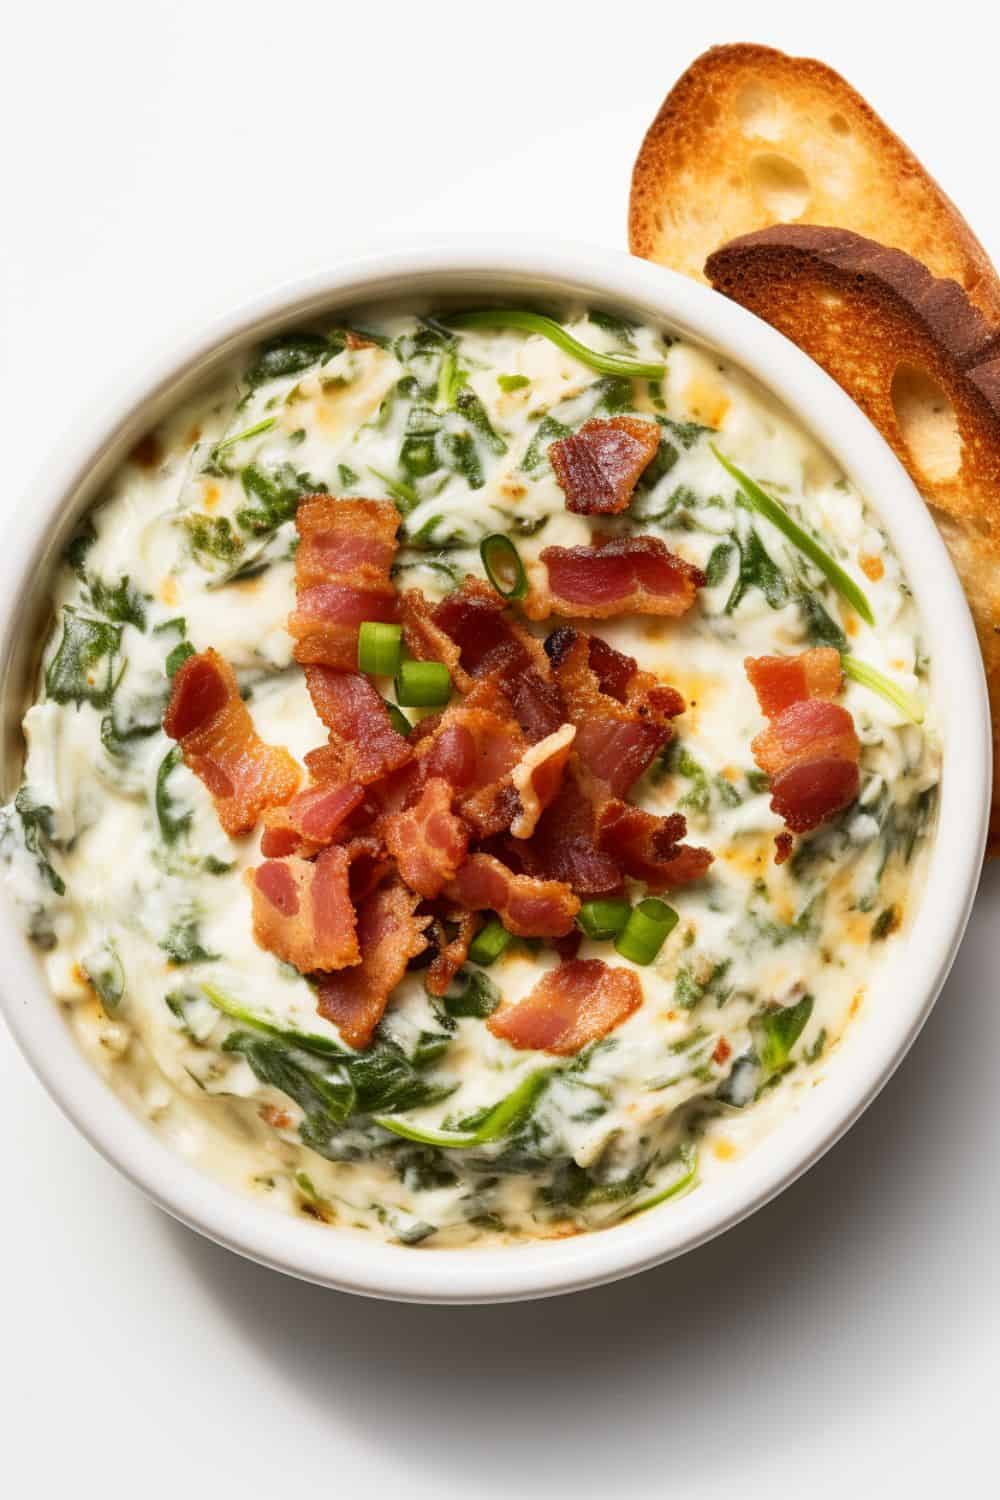 Top view of a bowl of Bacon Spinach Dip, revealing its creamy texture and generous sprinkling of crumbled bacon and chopped parsley.